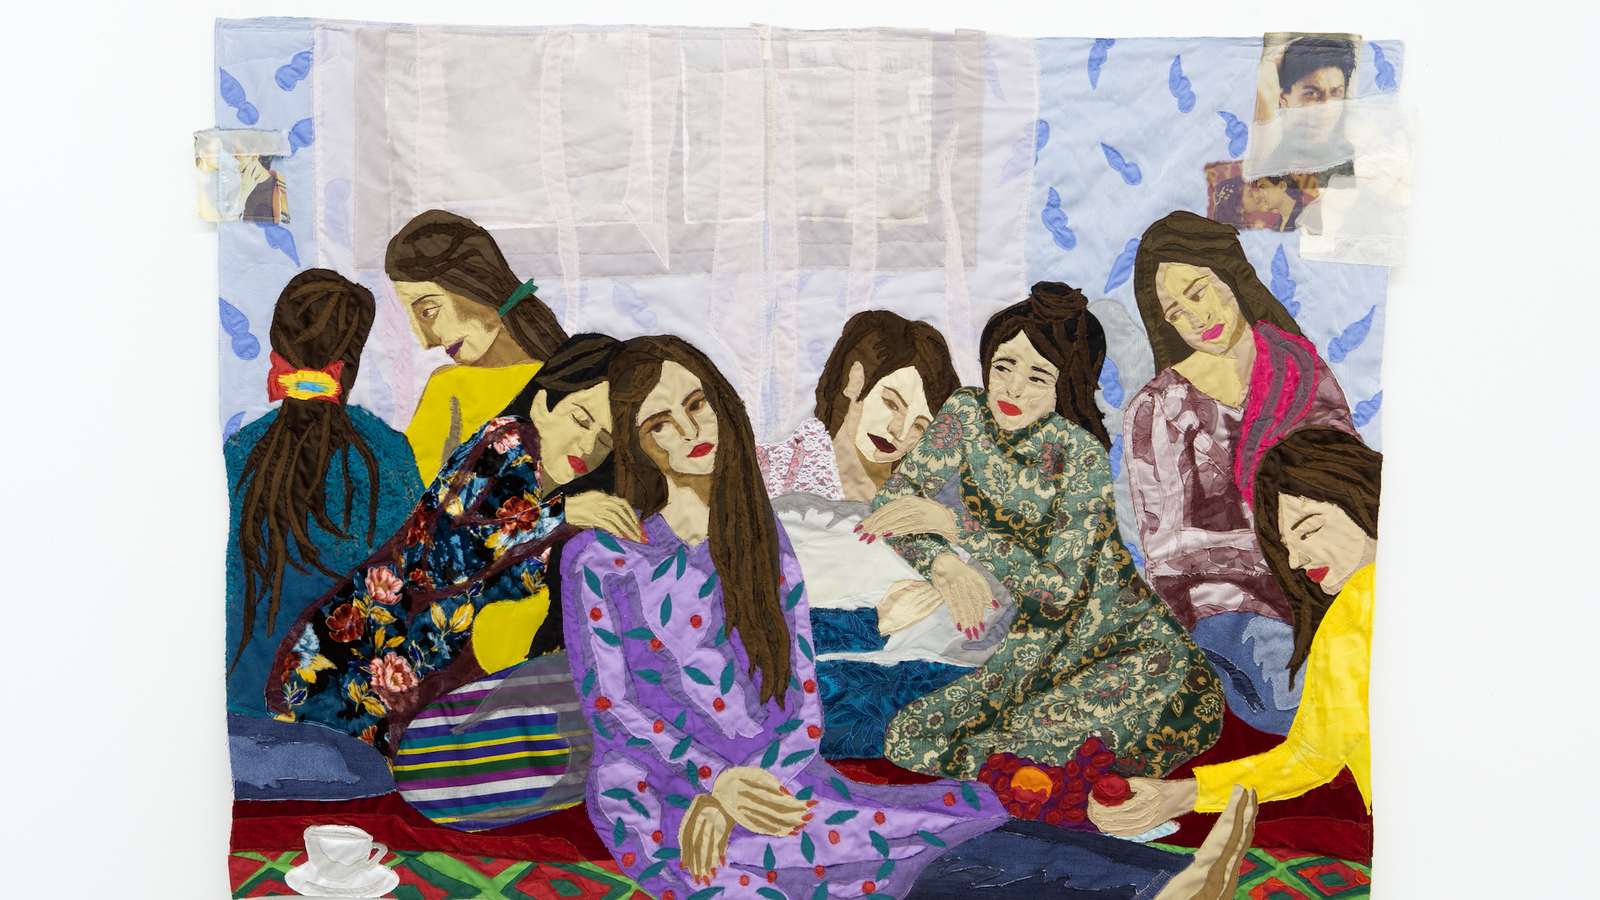 Hangama Amiri, Eight Seated Women, 2021Chiffon, cotton, muslin, polyester, velvet, silk, inkjet-print on chiffon, paper, and colour pencil on fabric, 112.92 x 152.4 cm, (44.6 × 60 in)Courtesy of the artist and T293 Gallery